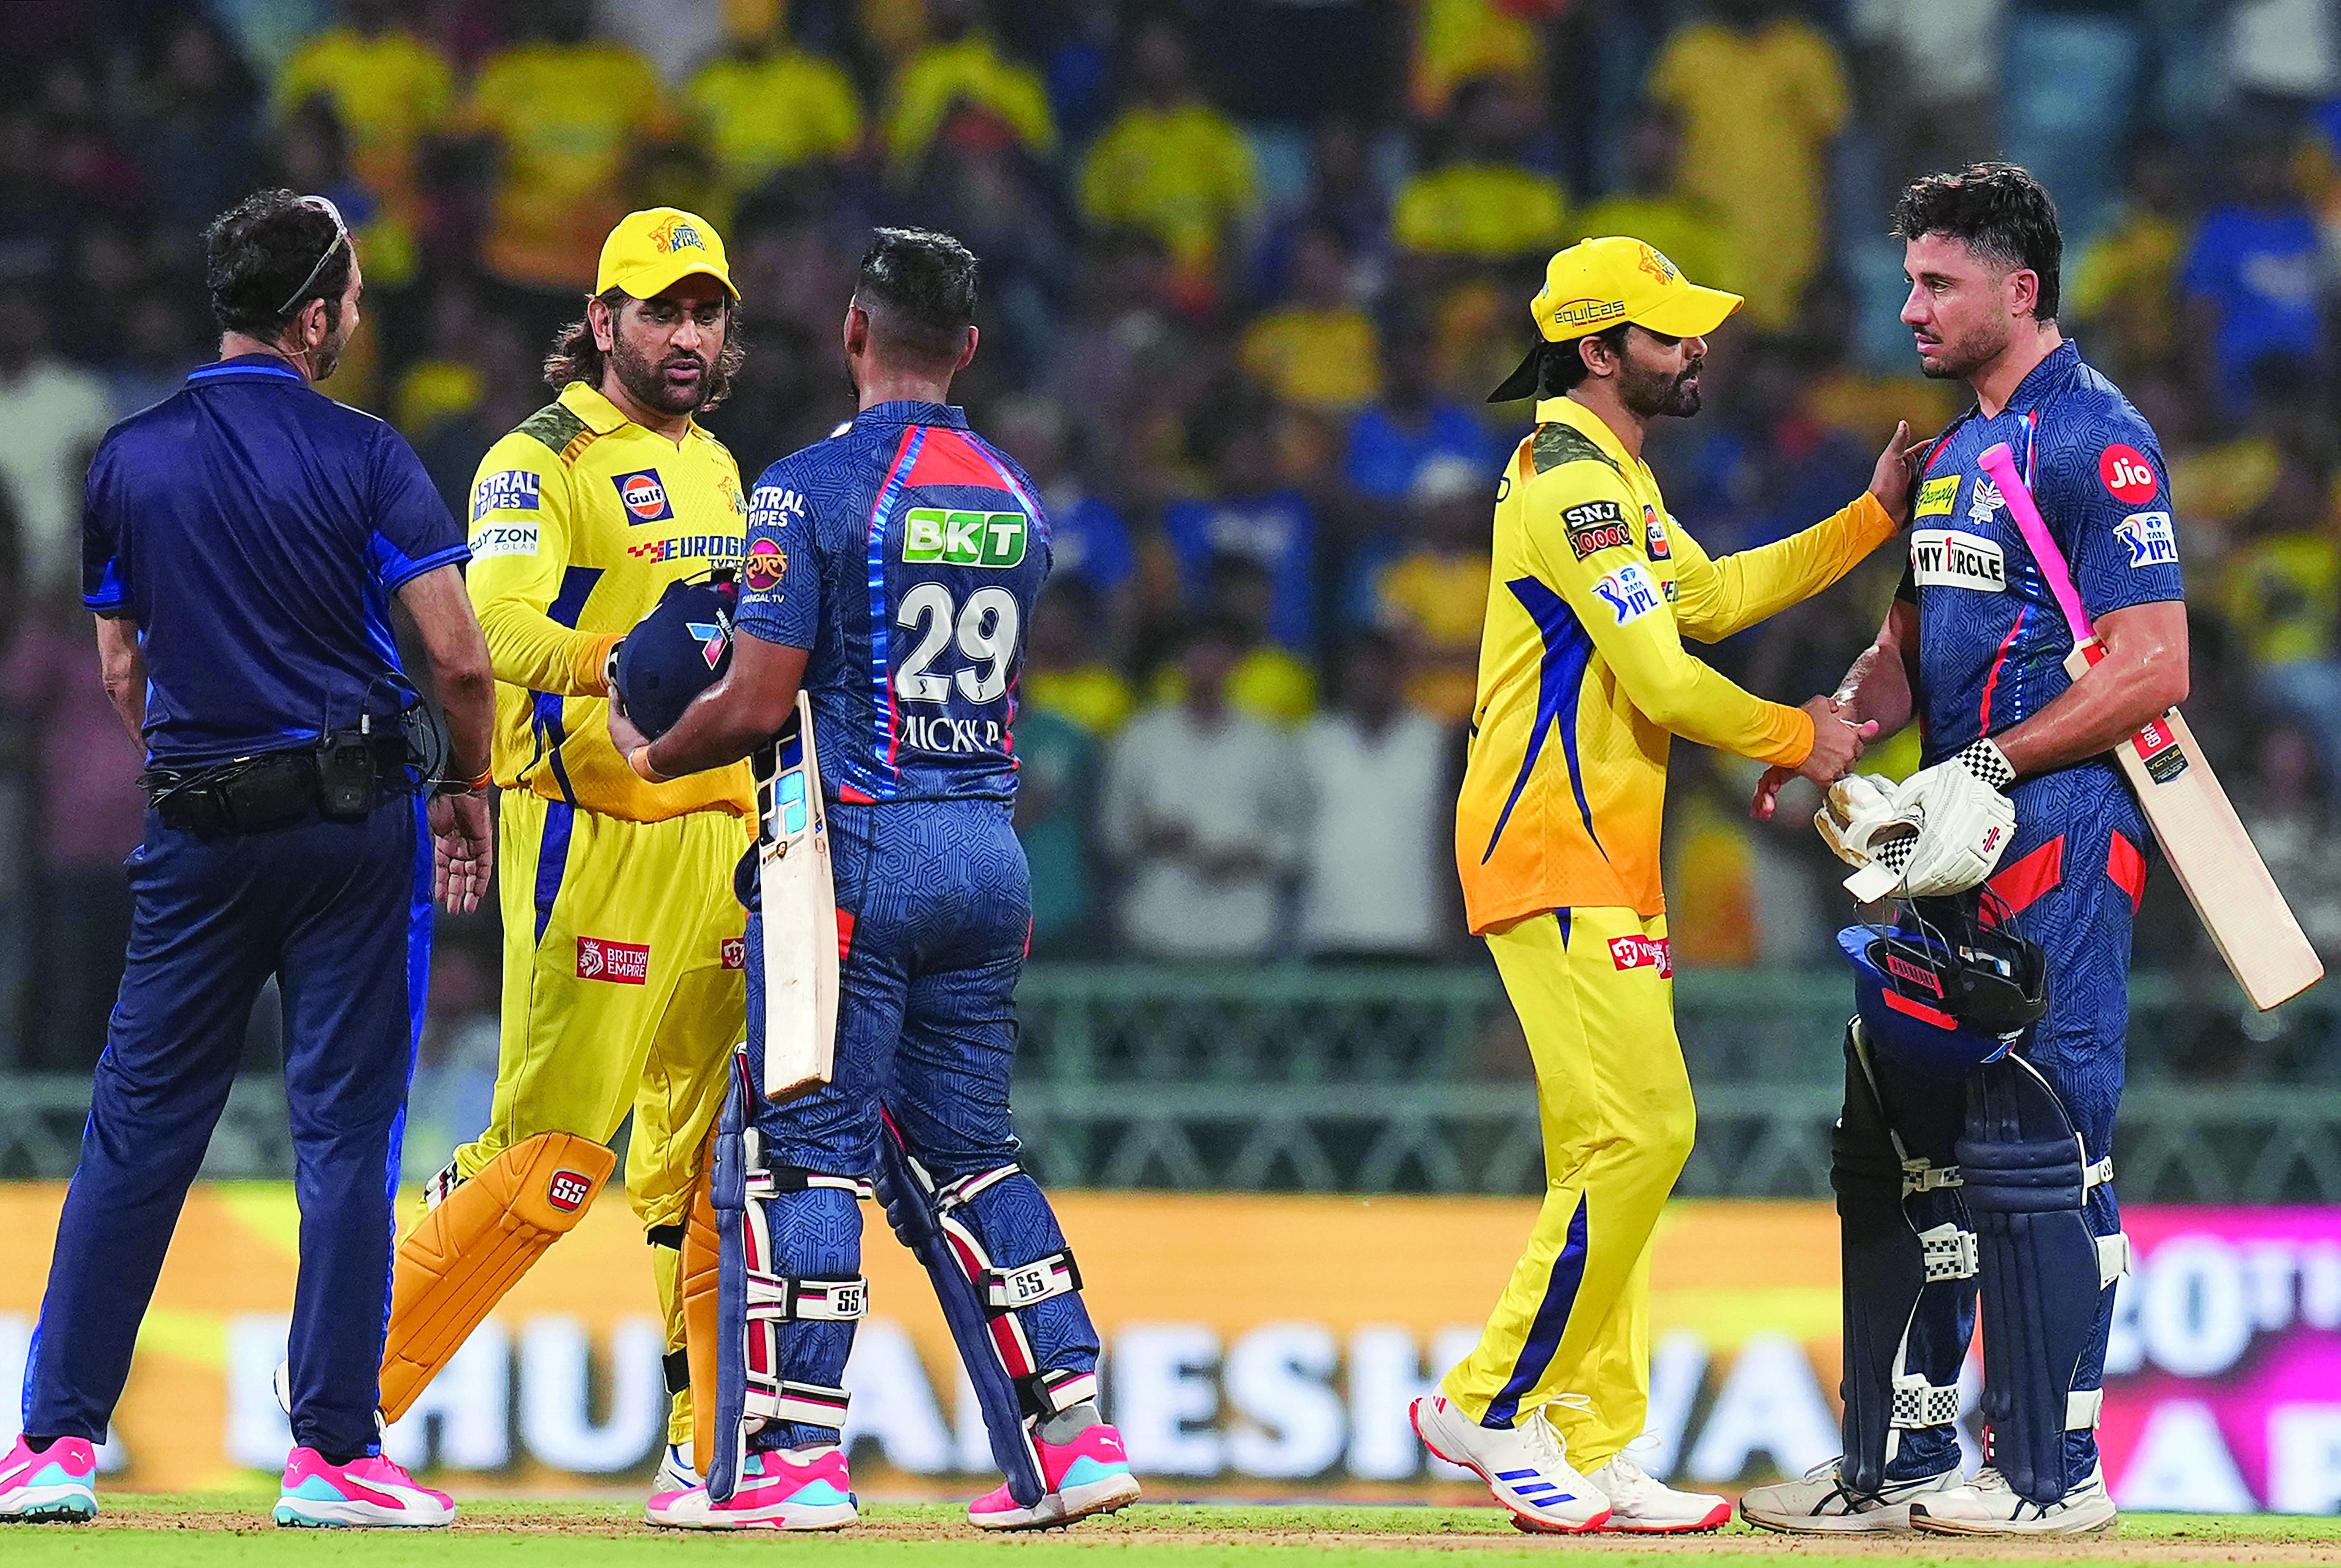 Revenge on CSK’s mind as LSG eye a heist in Dhoni’s bastion